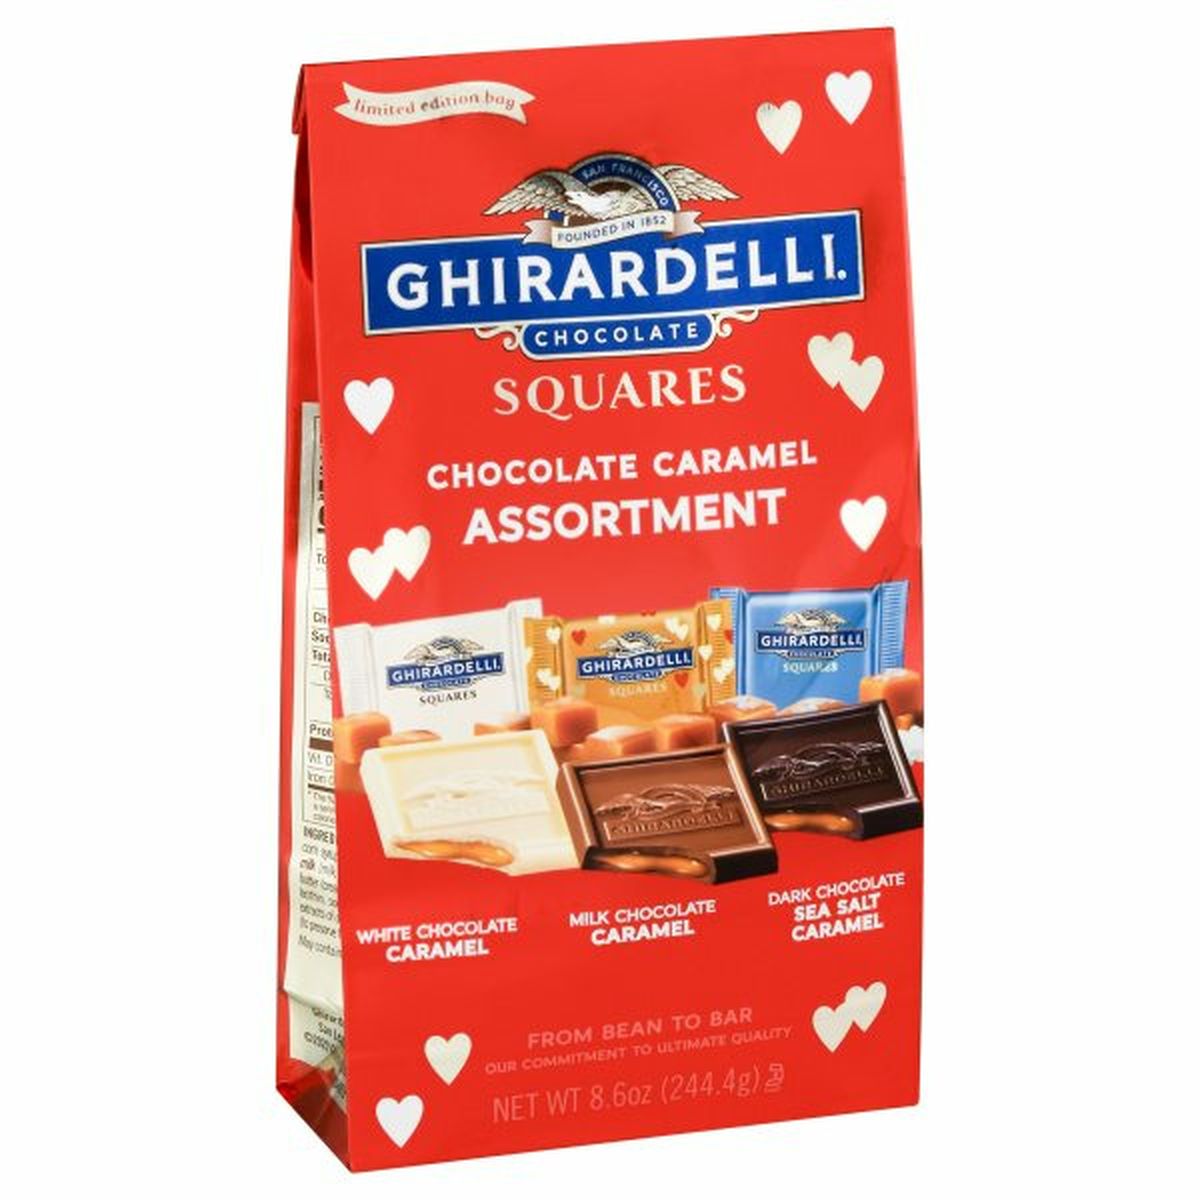 Calories in Ghirardelli Chocolate Caramel, Assortment, Squares, Limited Edition